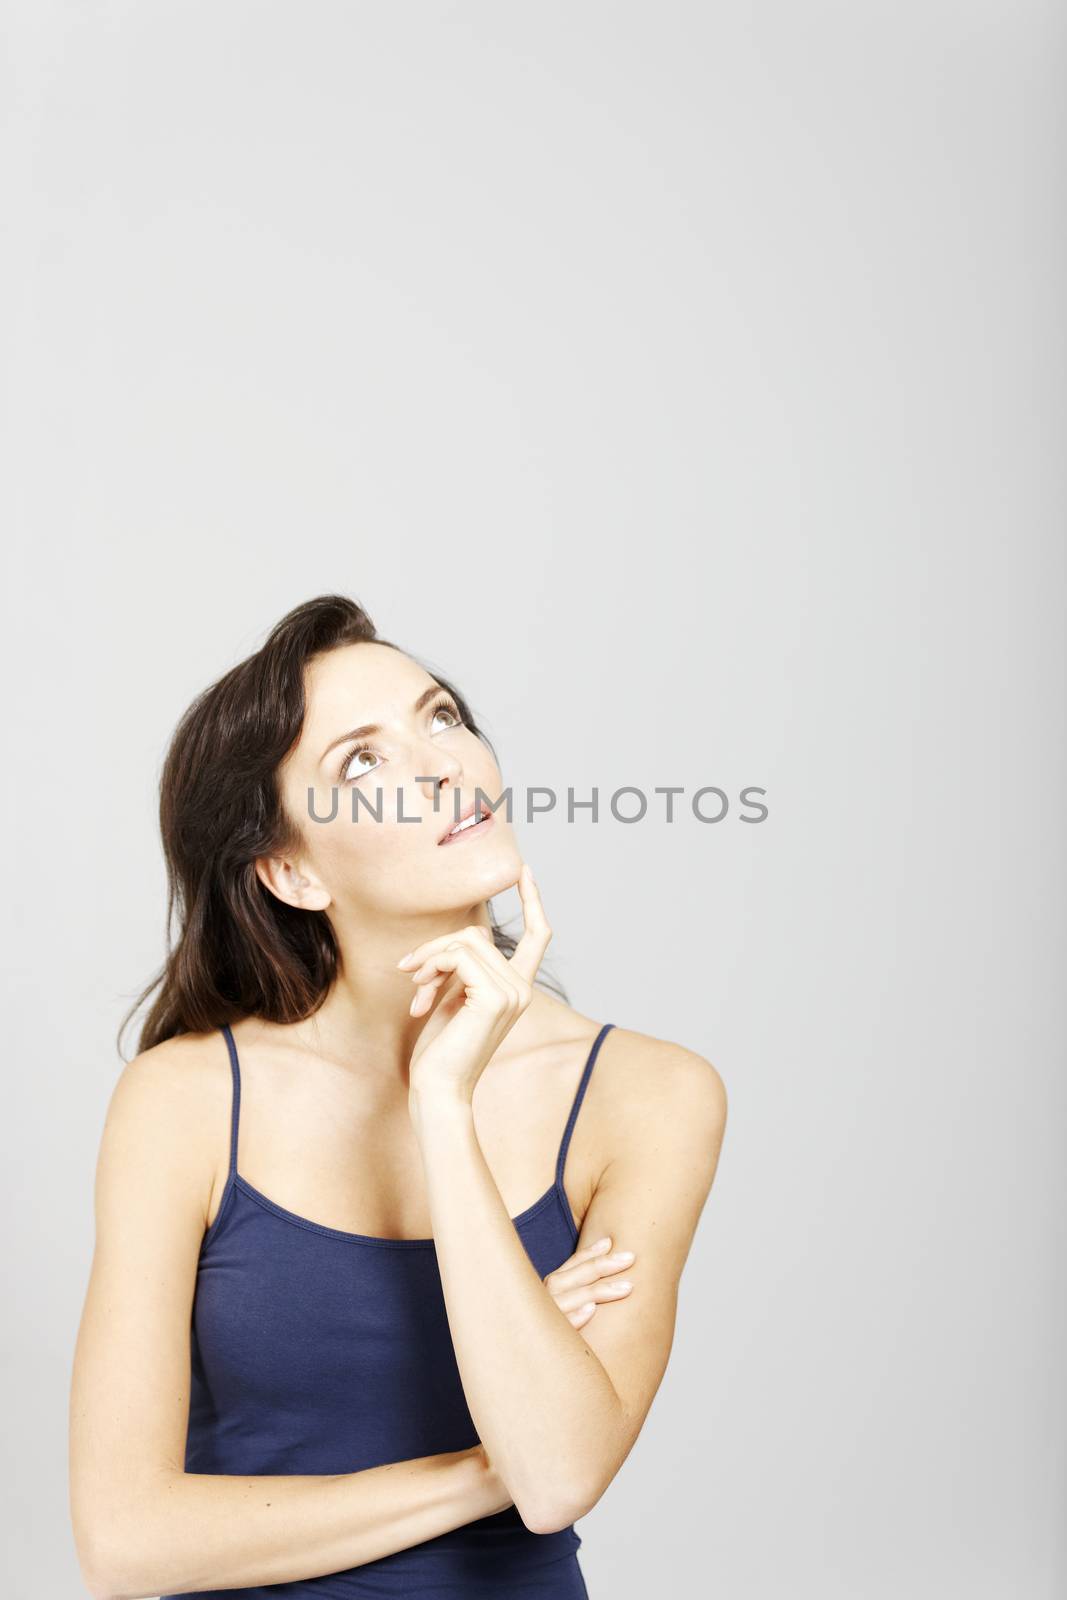 Young woman looking to her left expressing an idea or thought.